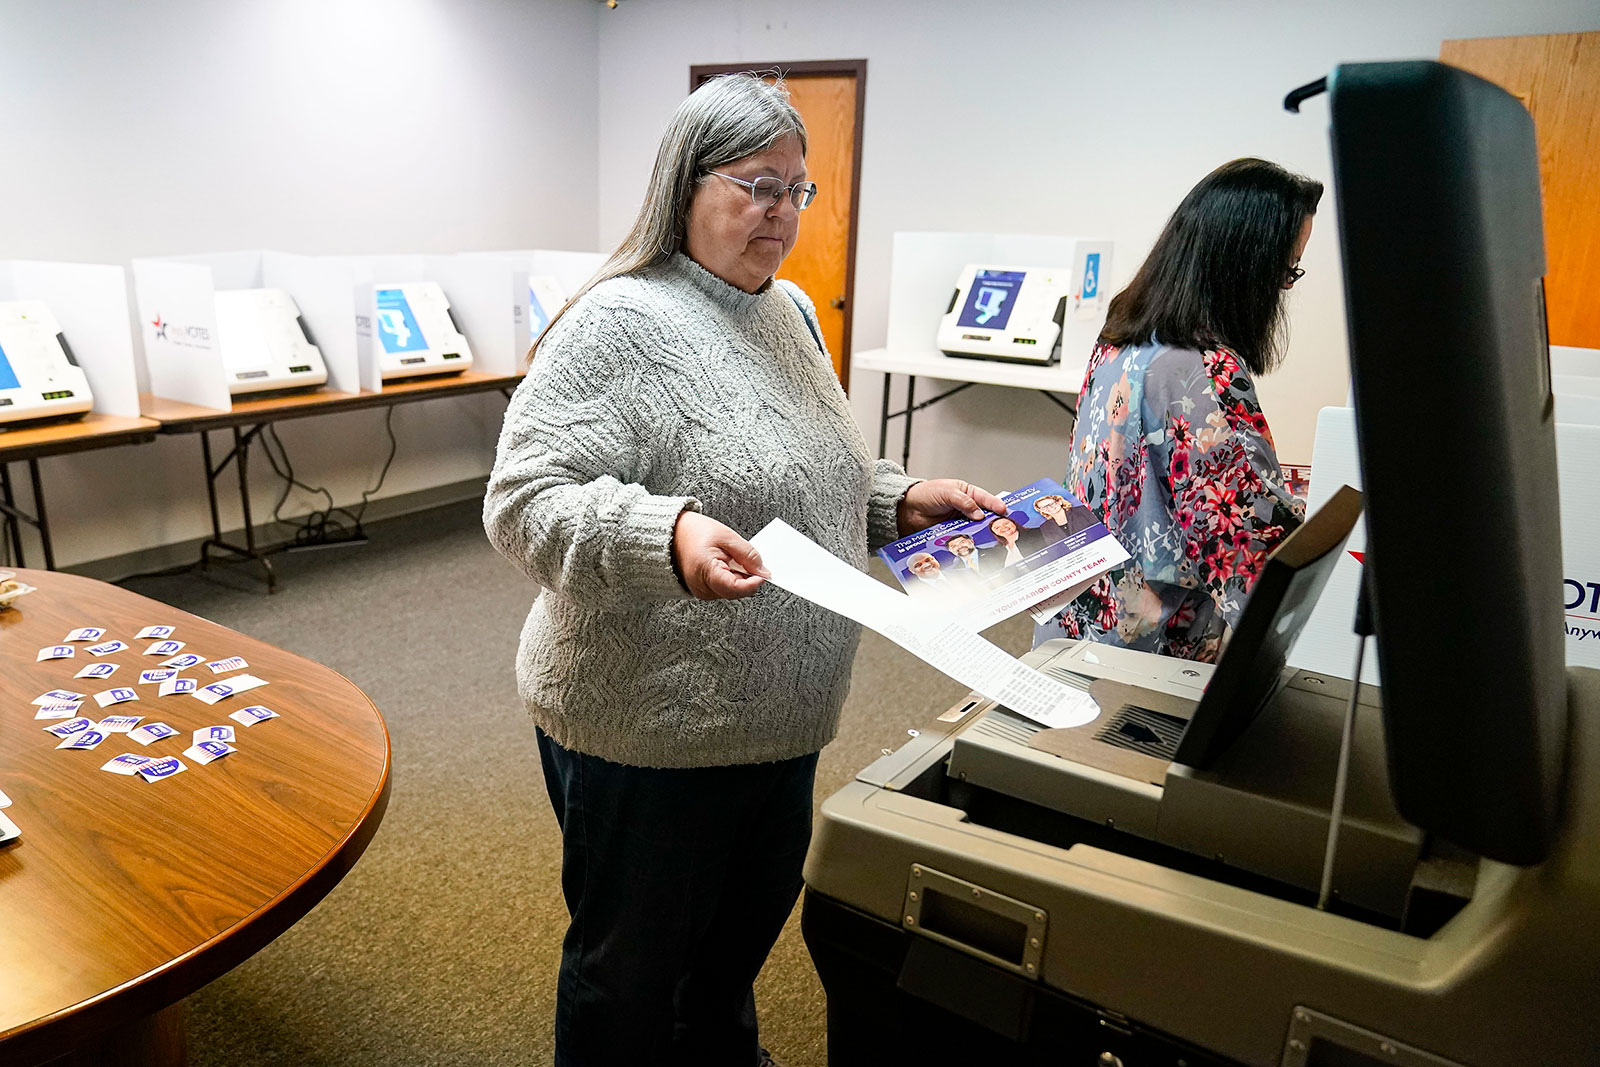 A voter inserts her ballot into a scanner as she votes in the primaries in Indianapolis, Indiana, on Tuesday, May 3.